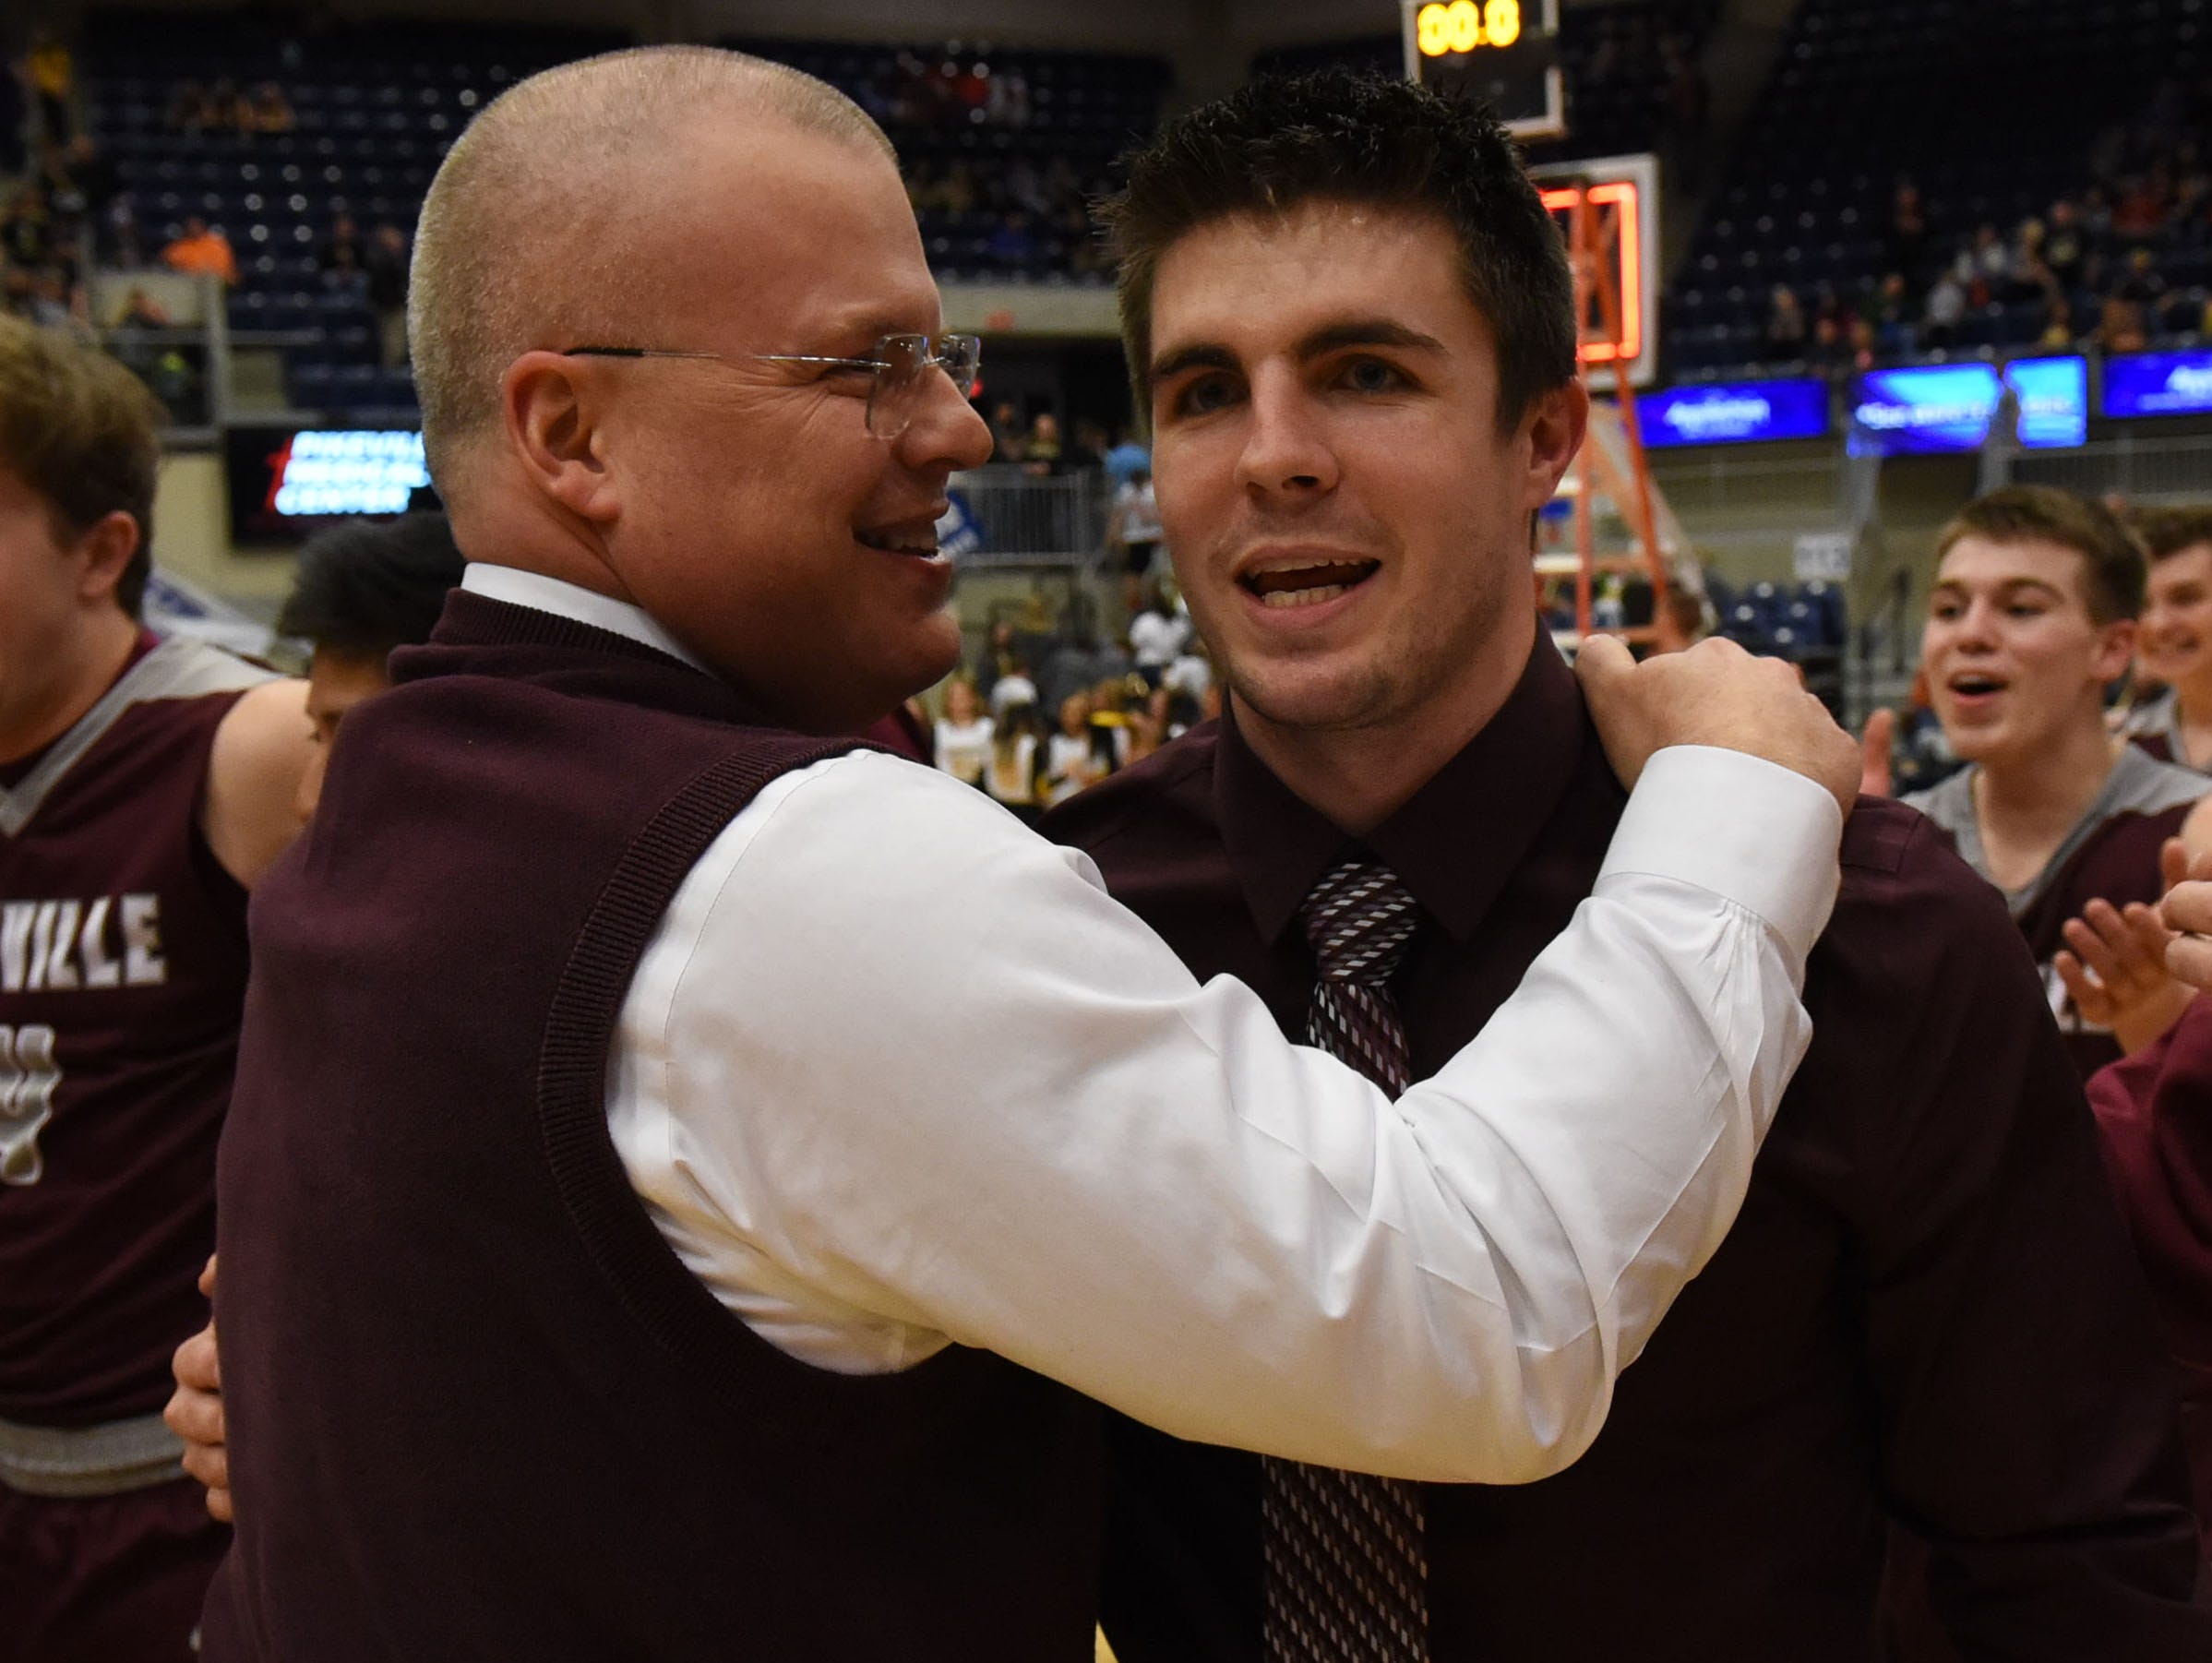 Pikeville Schools superintendent Jerry Green (left) and Pikeville coach Elisha Justice celebrate after Pikeville's win over Johnson Central in the 15th Region Tournament championship game on March 6.